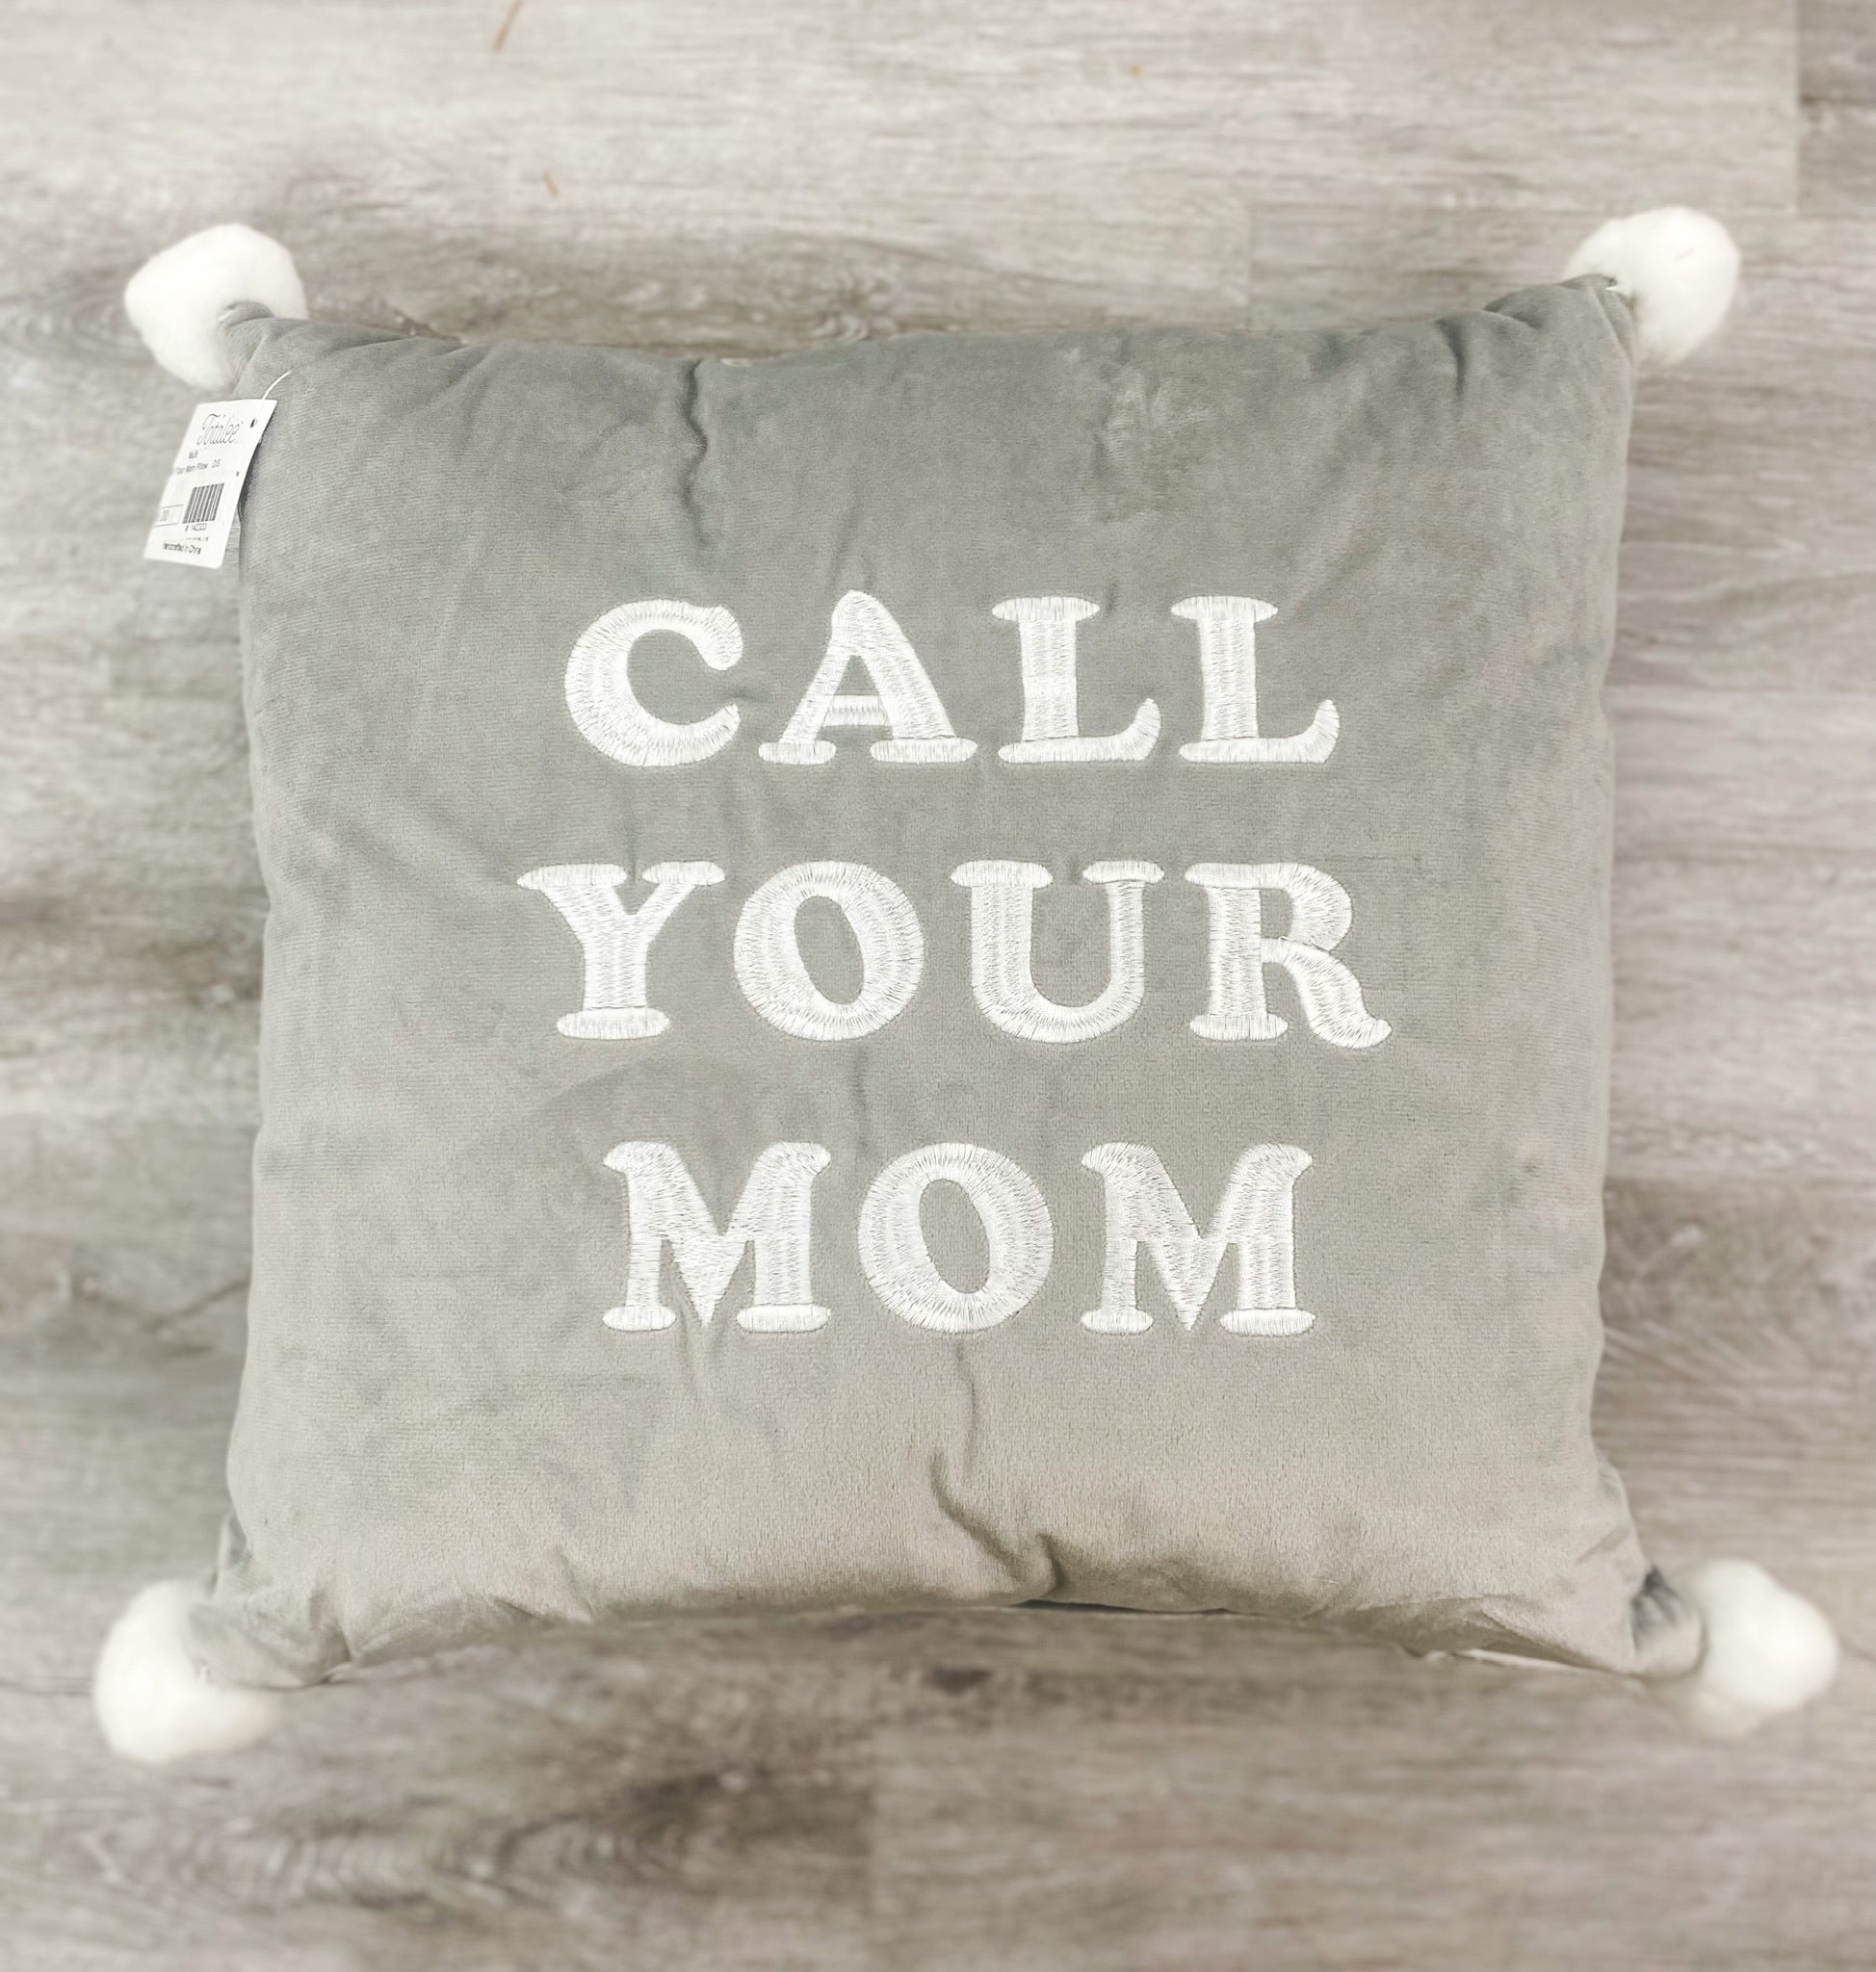 Call your mom square pillow - Trendy Gifts at Lush Fashion Lounge Boutique in Oklahoma City